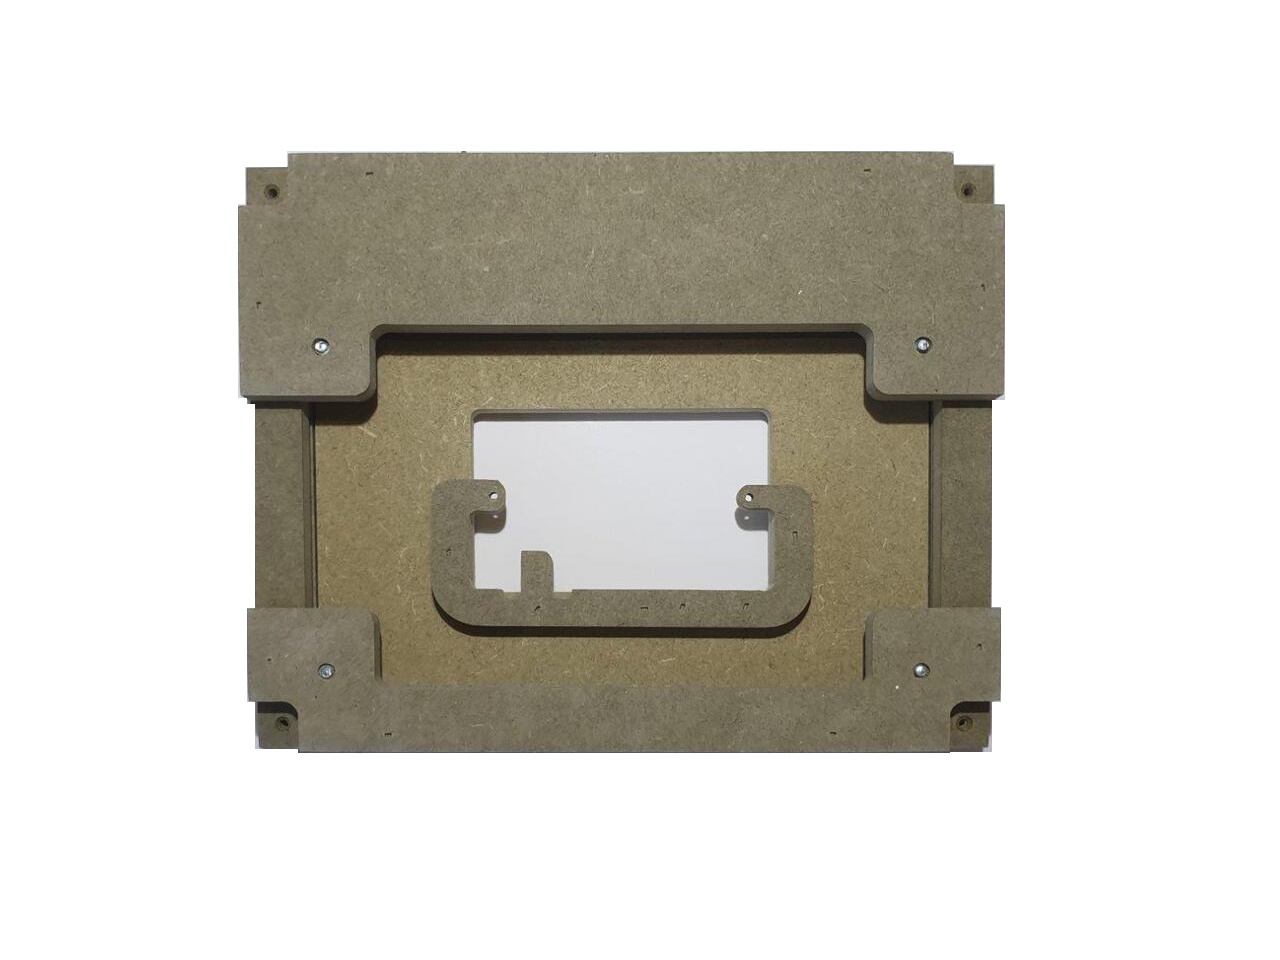 007-1-846 Solid Surface Mount C4-T4IW8 by Wall-Smart